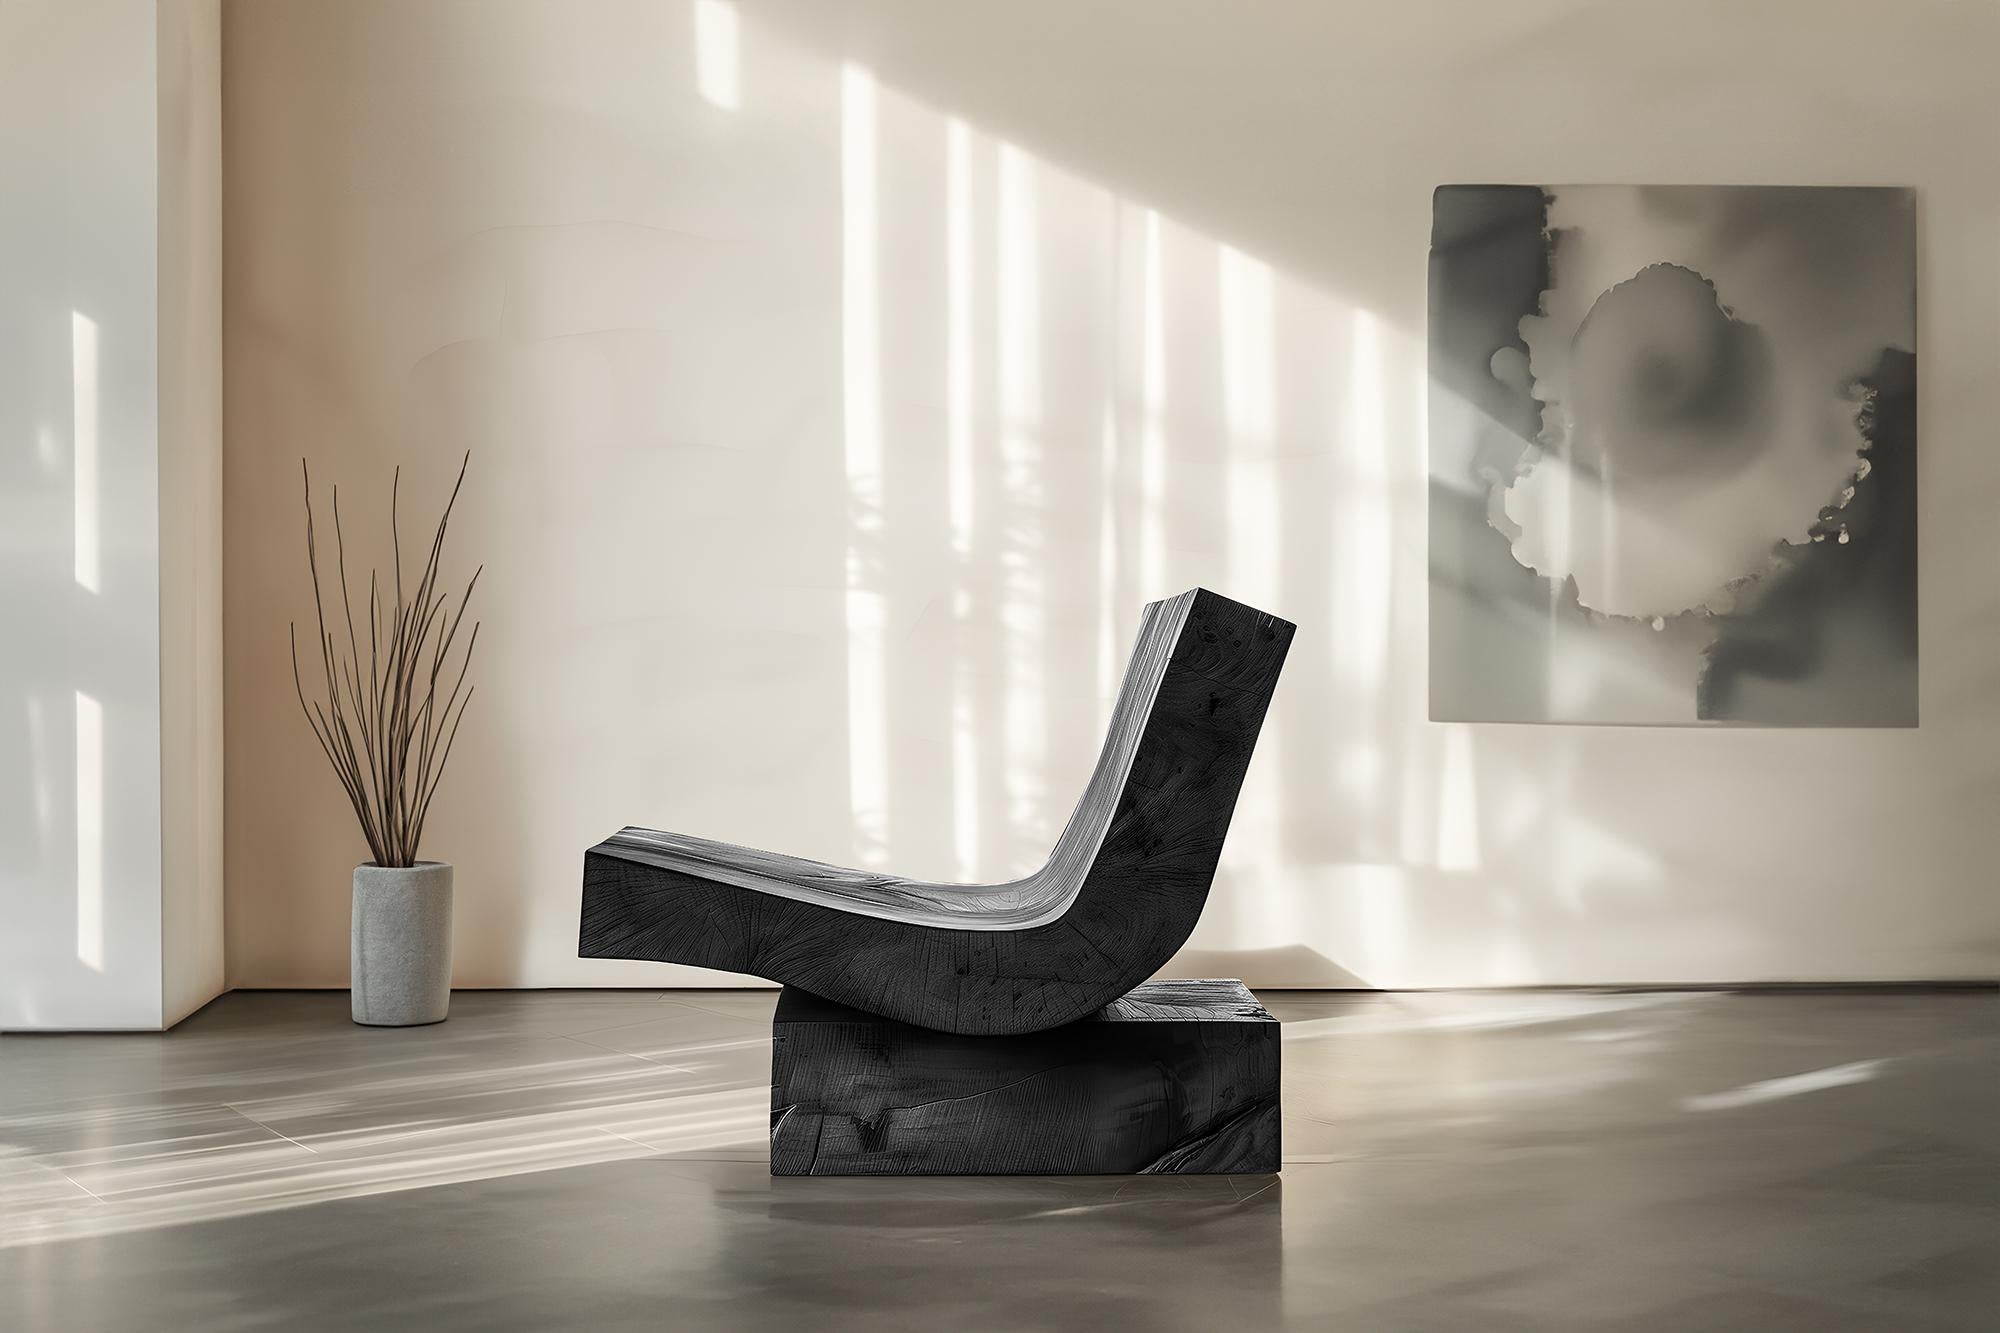 Mexicain Muted by NONO No10, chaise en chêne massif, luxe minimaliste en vente